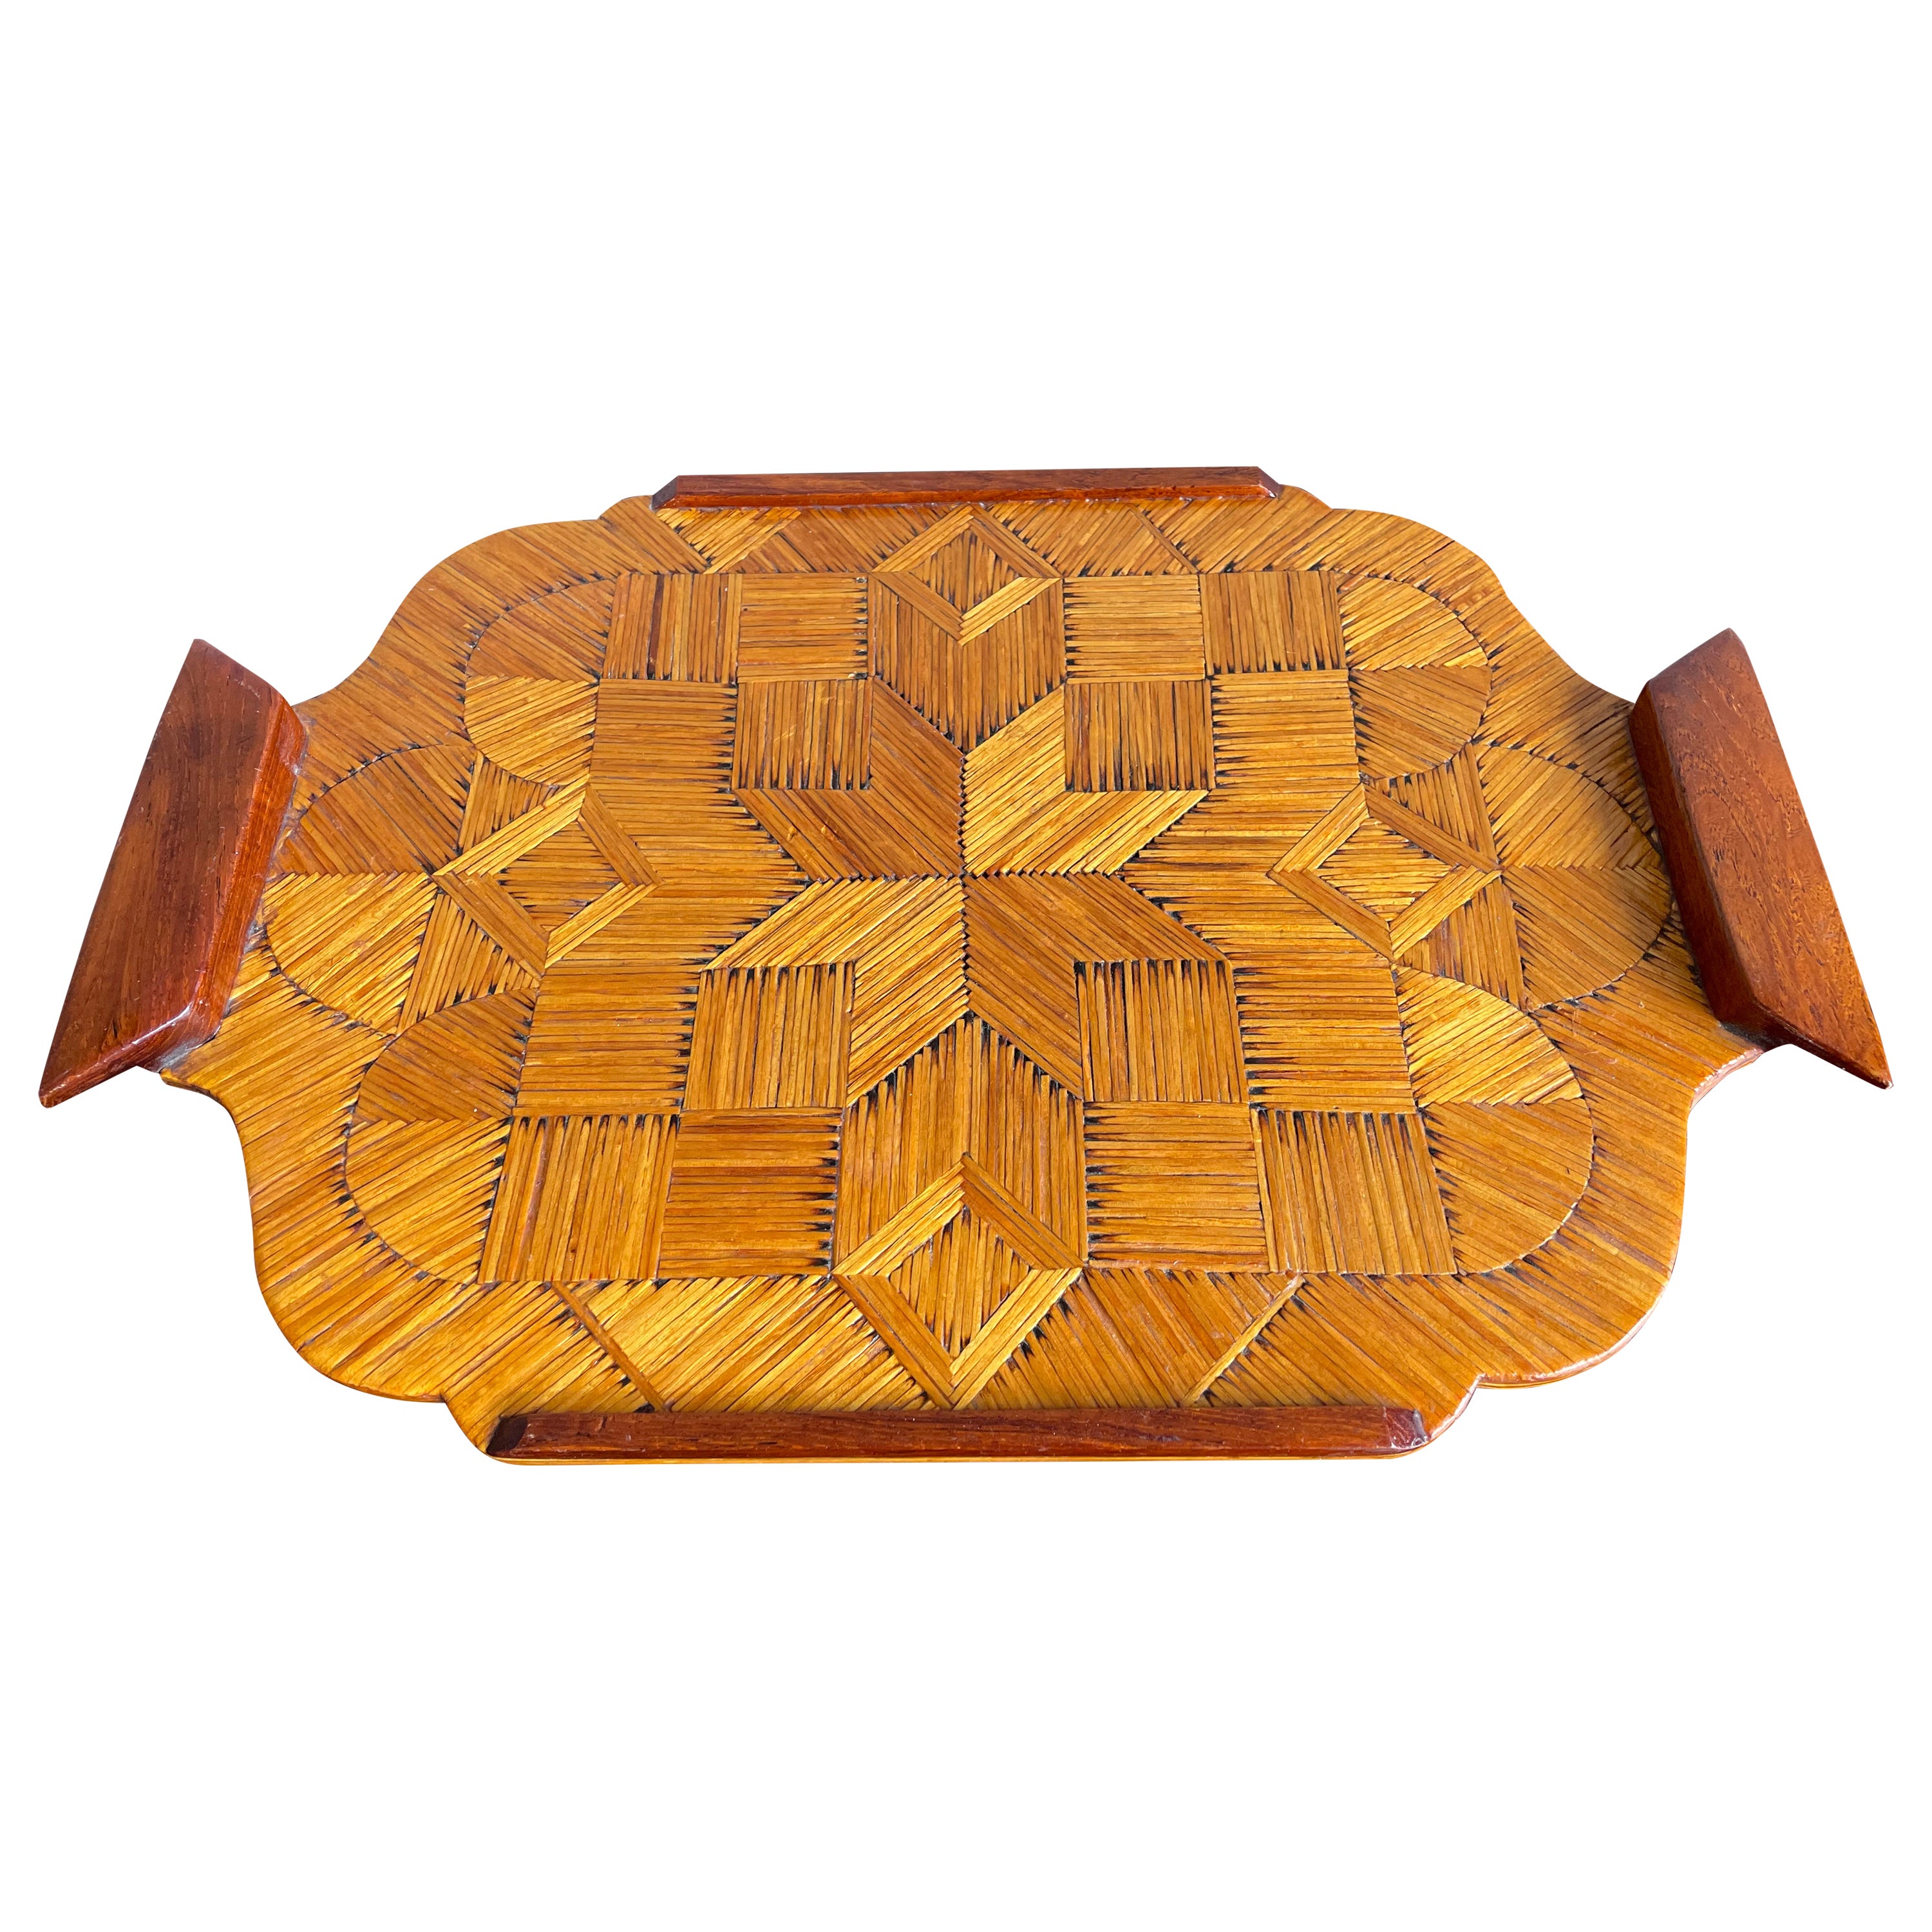 Midcentury Folk Art Serving Tray, Handmade of Burnt Matches in Parquetry Pattern For Sale